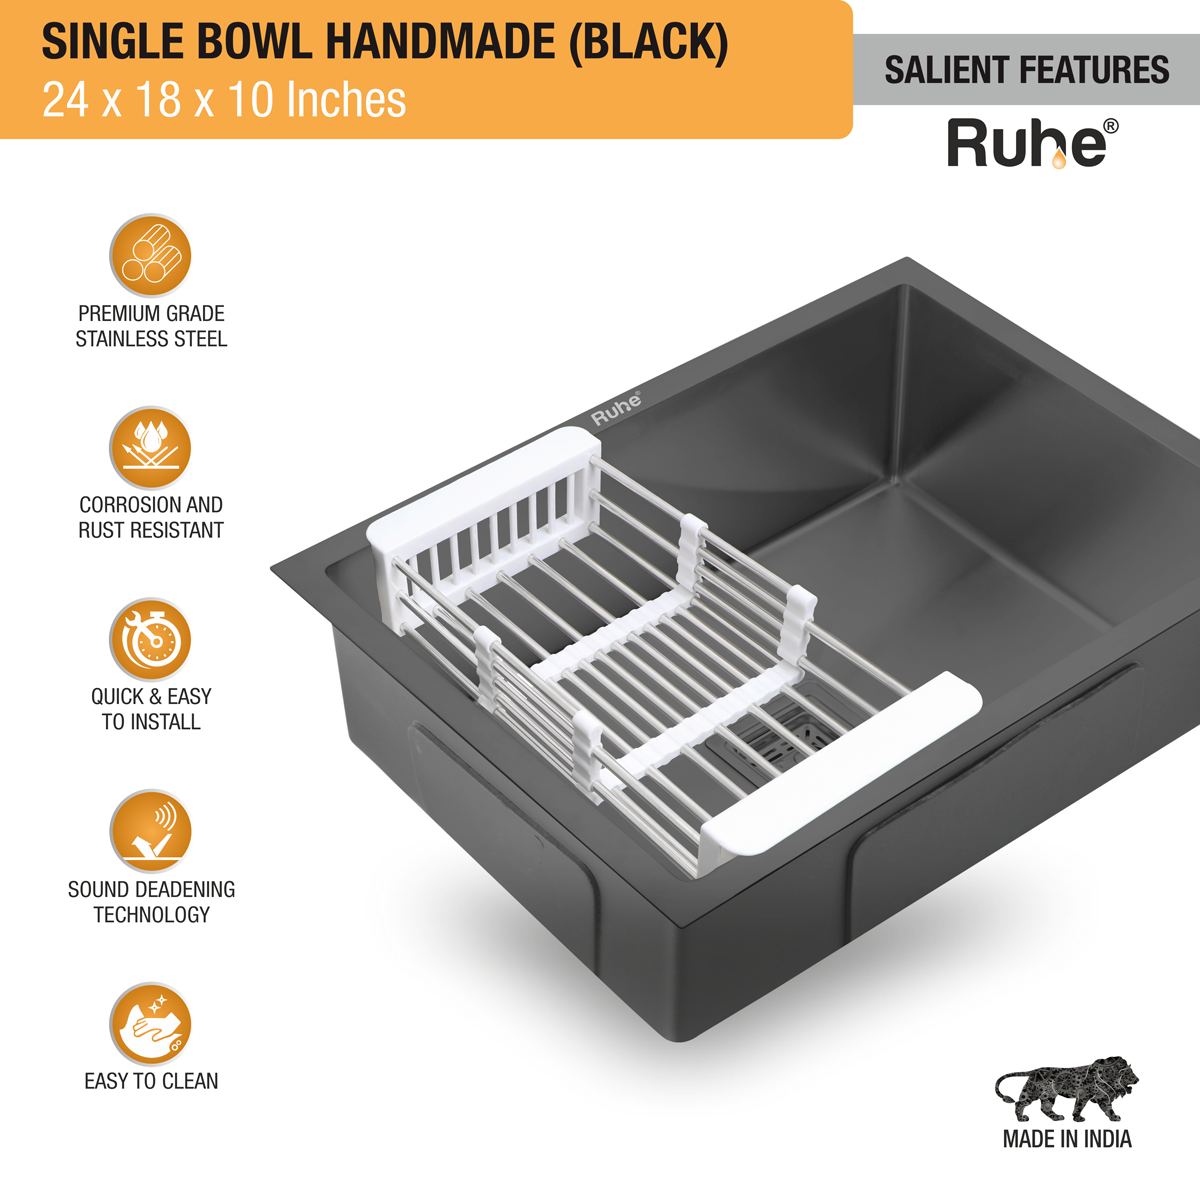 Black Handmade Single Bowl Premium Stainless Steel Kitchen Sink ( 24 x 18 x 10 Inches) - by Ruhe®